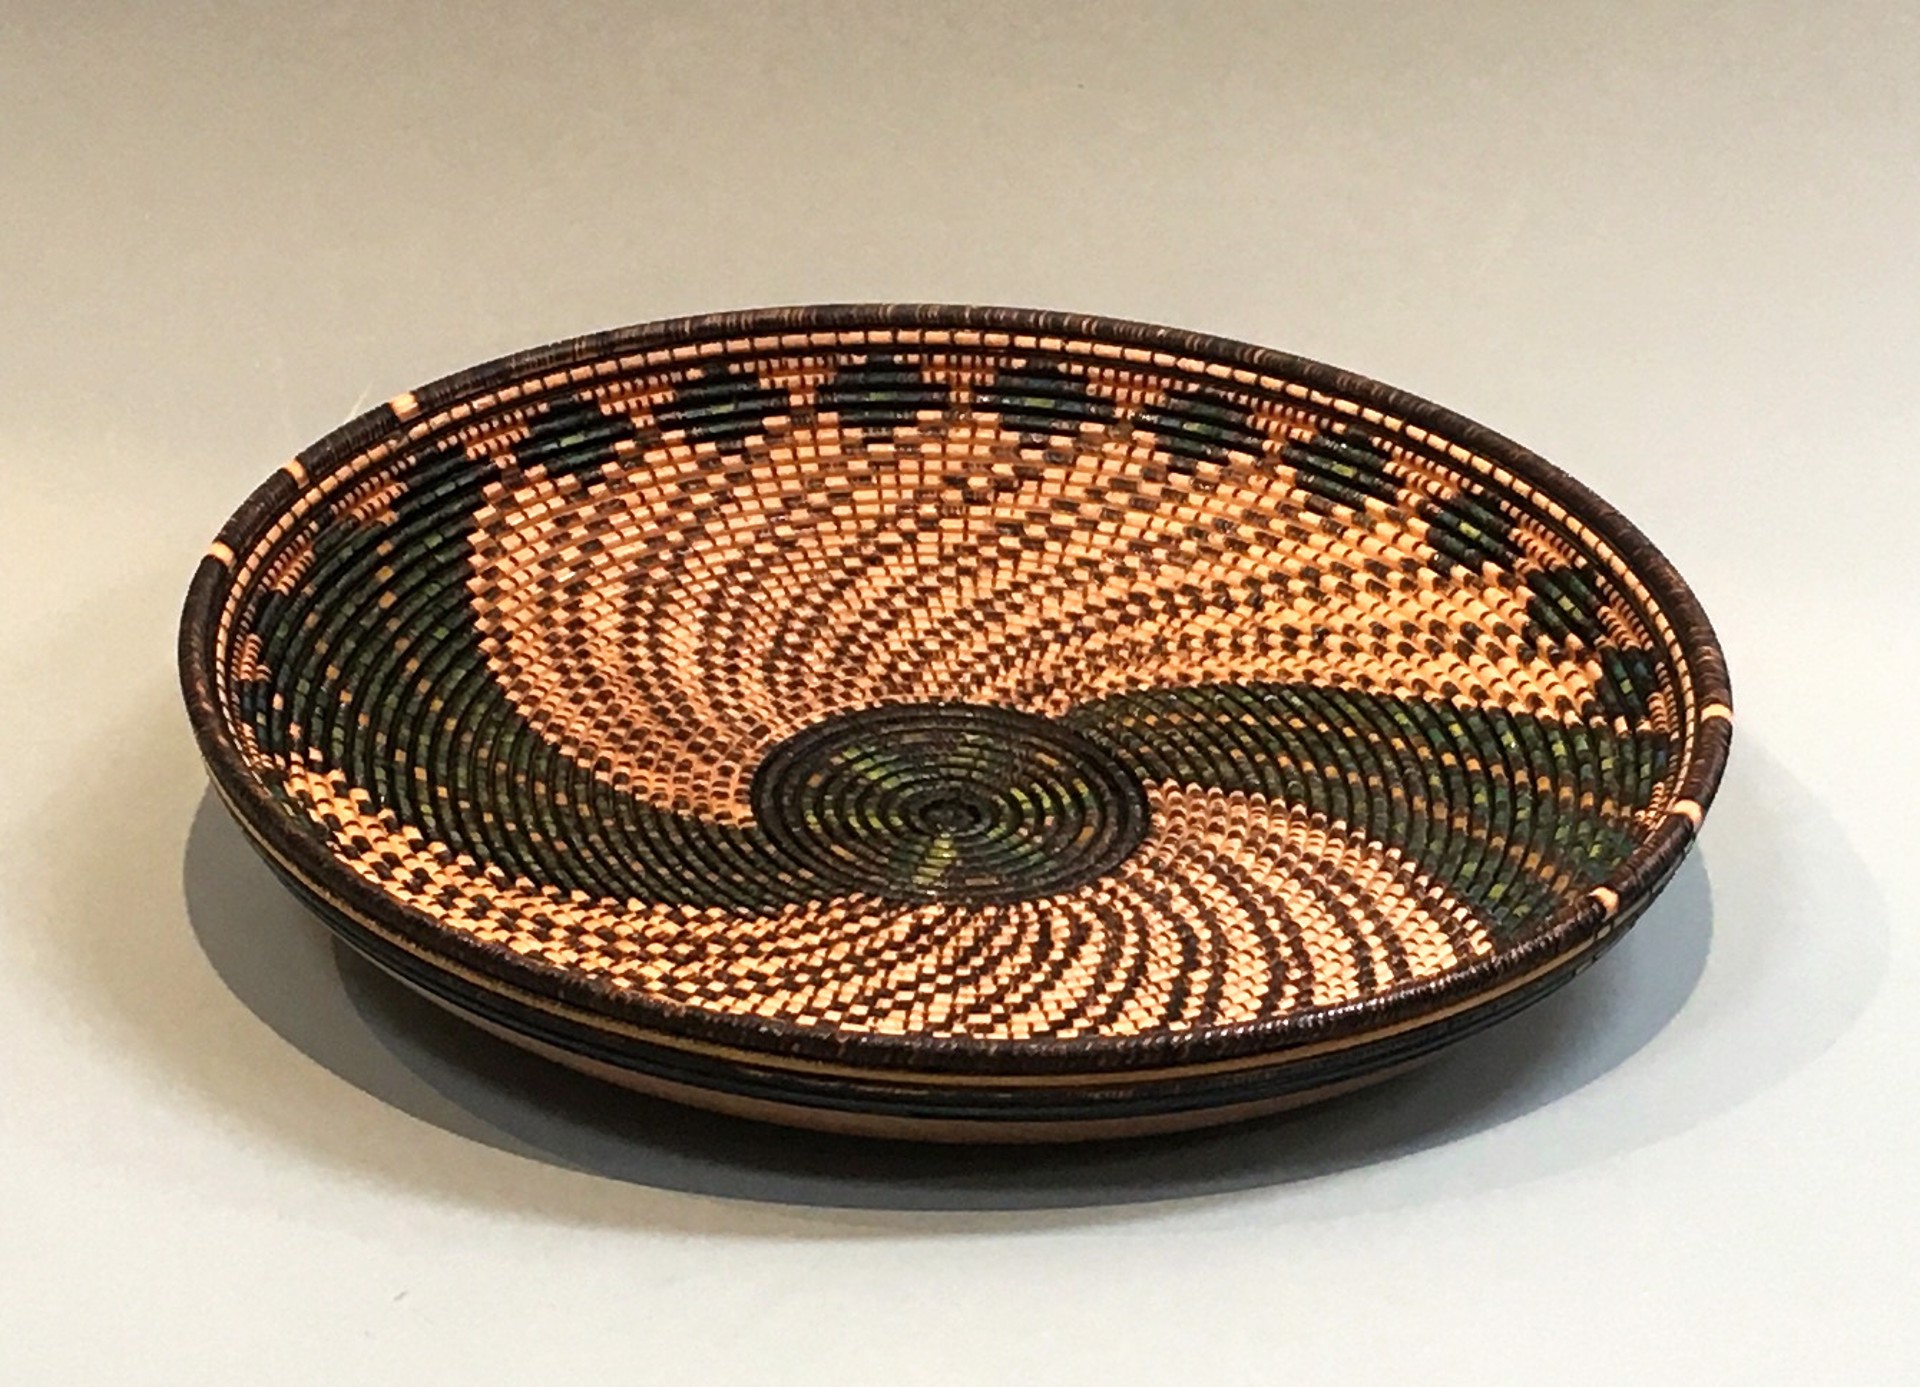 "Orion" Platter by Keoni